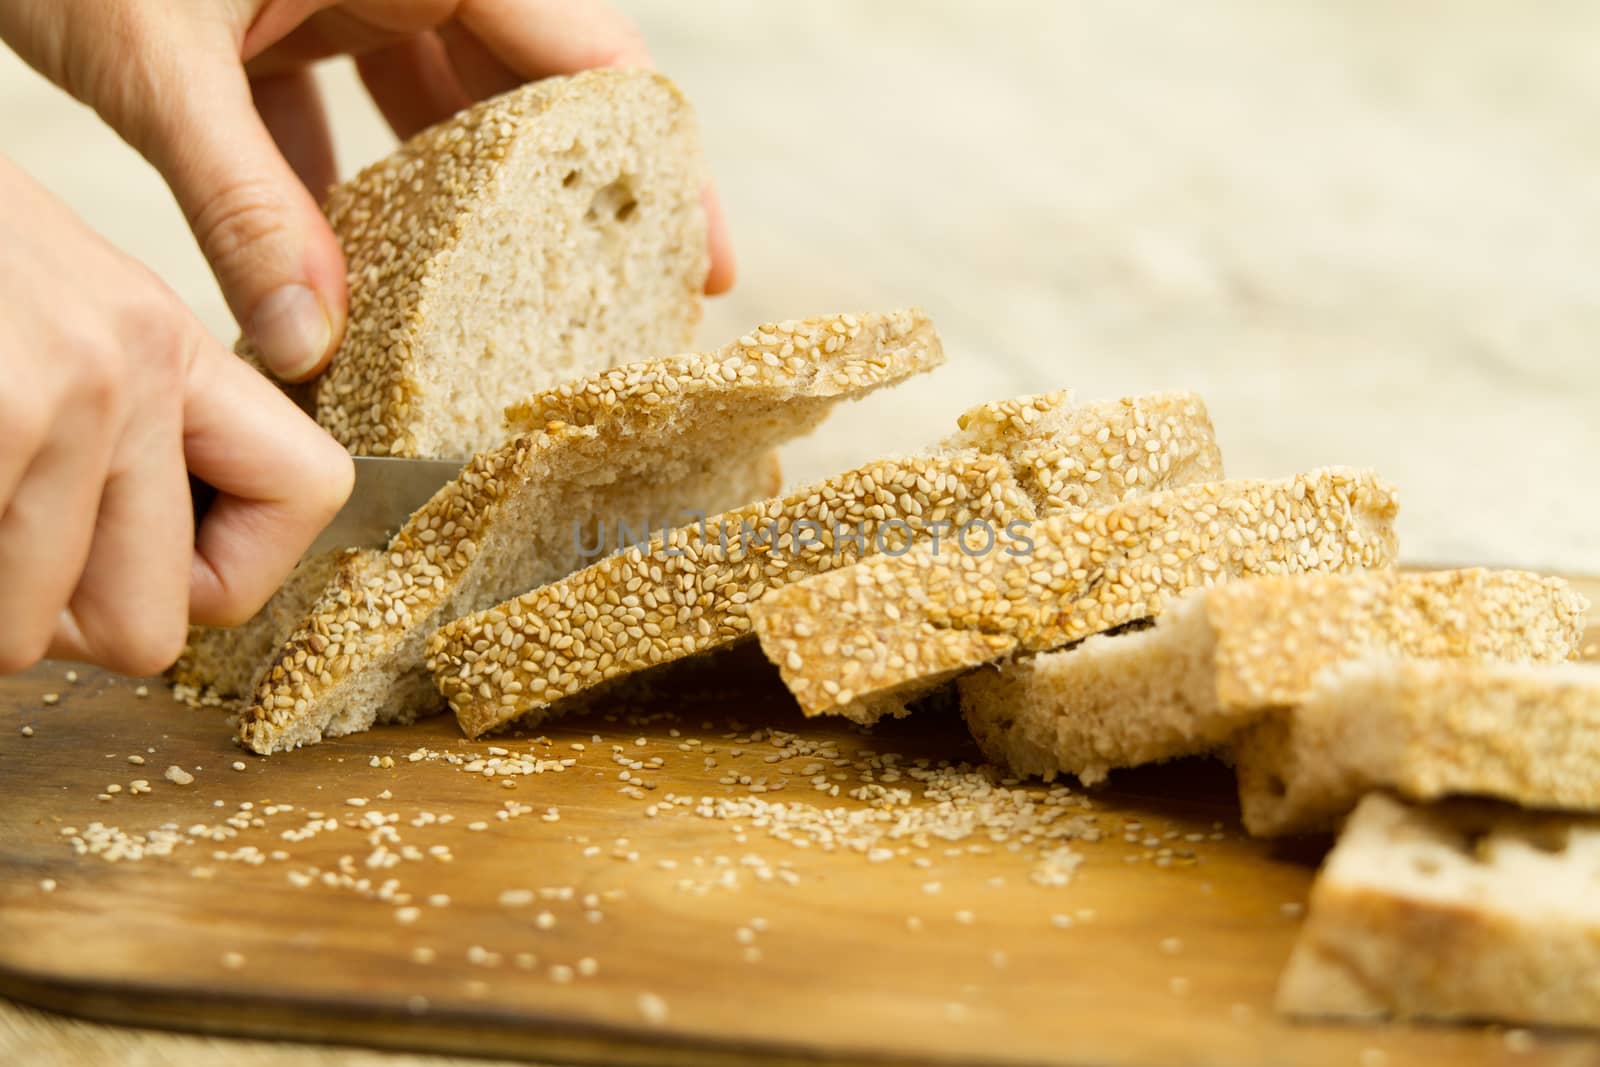 Close up of woman hands slicing a loaf of homemade bread with se